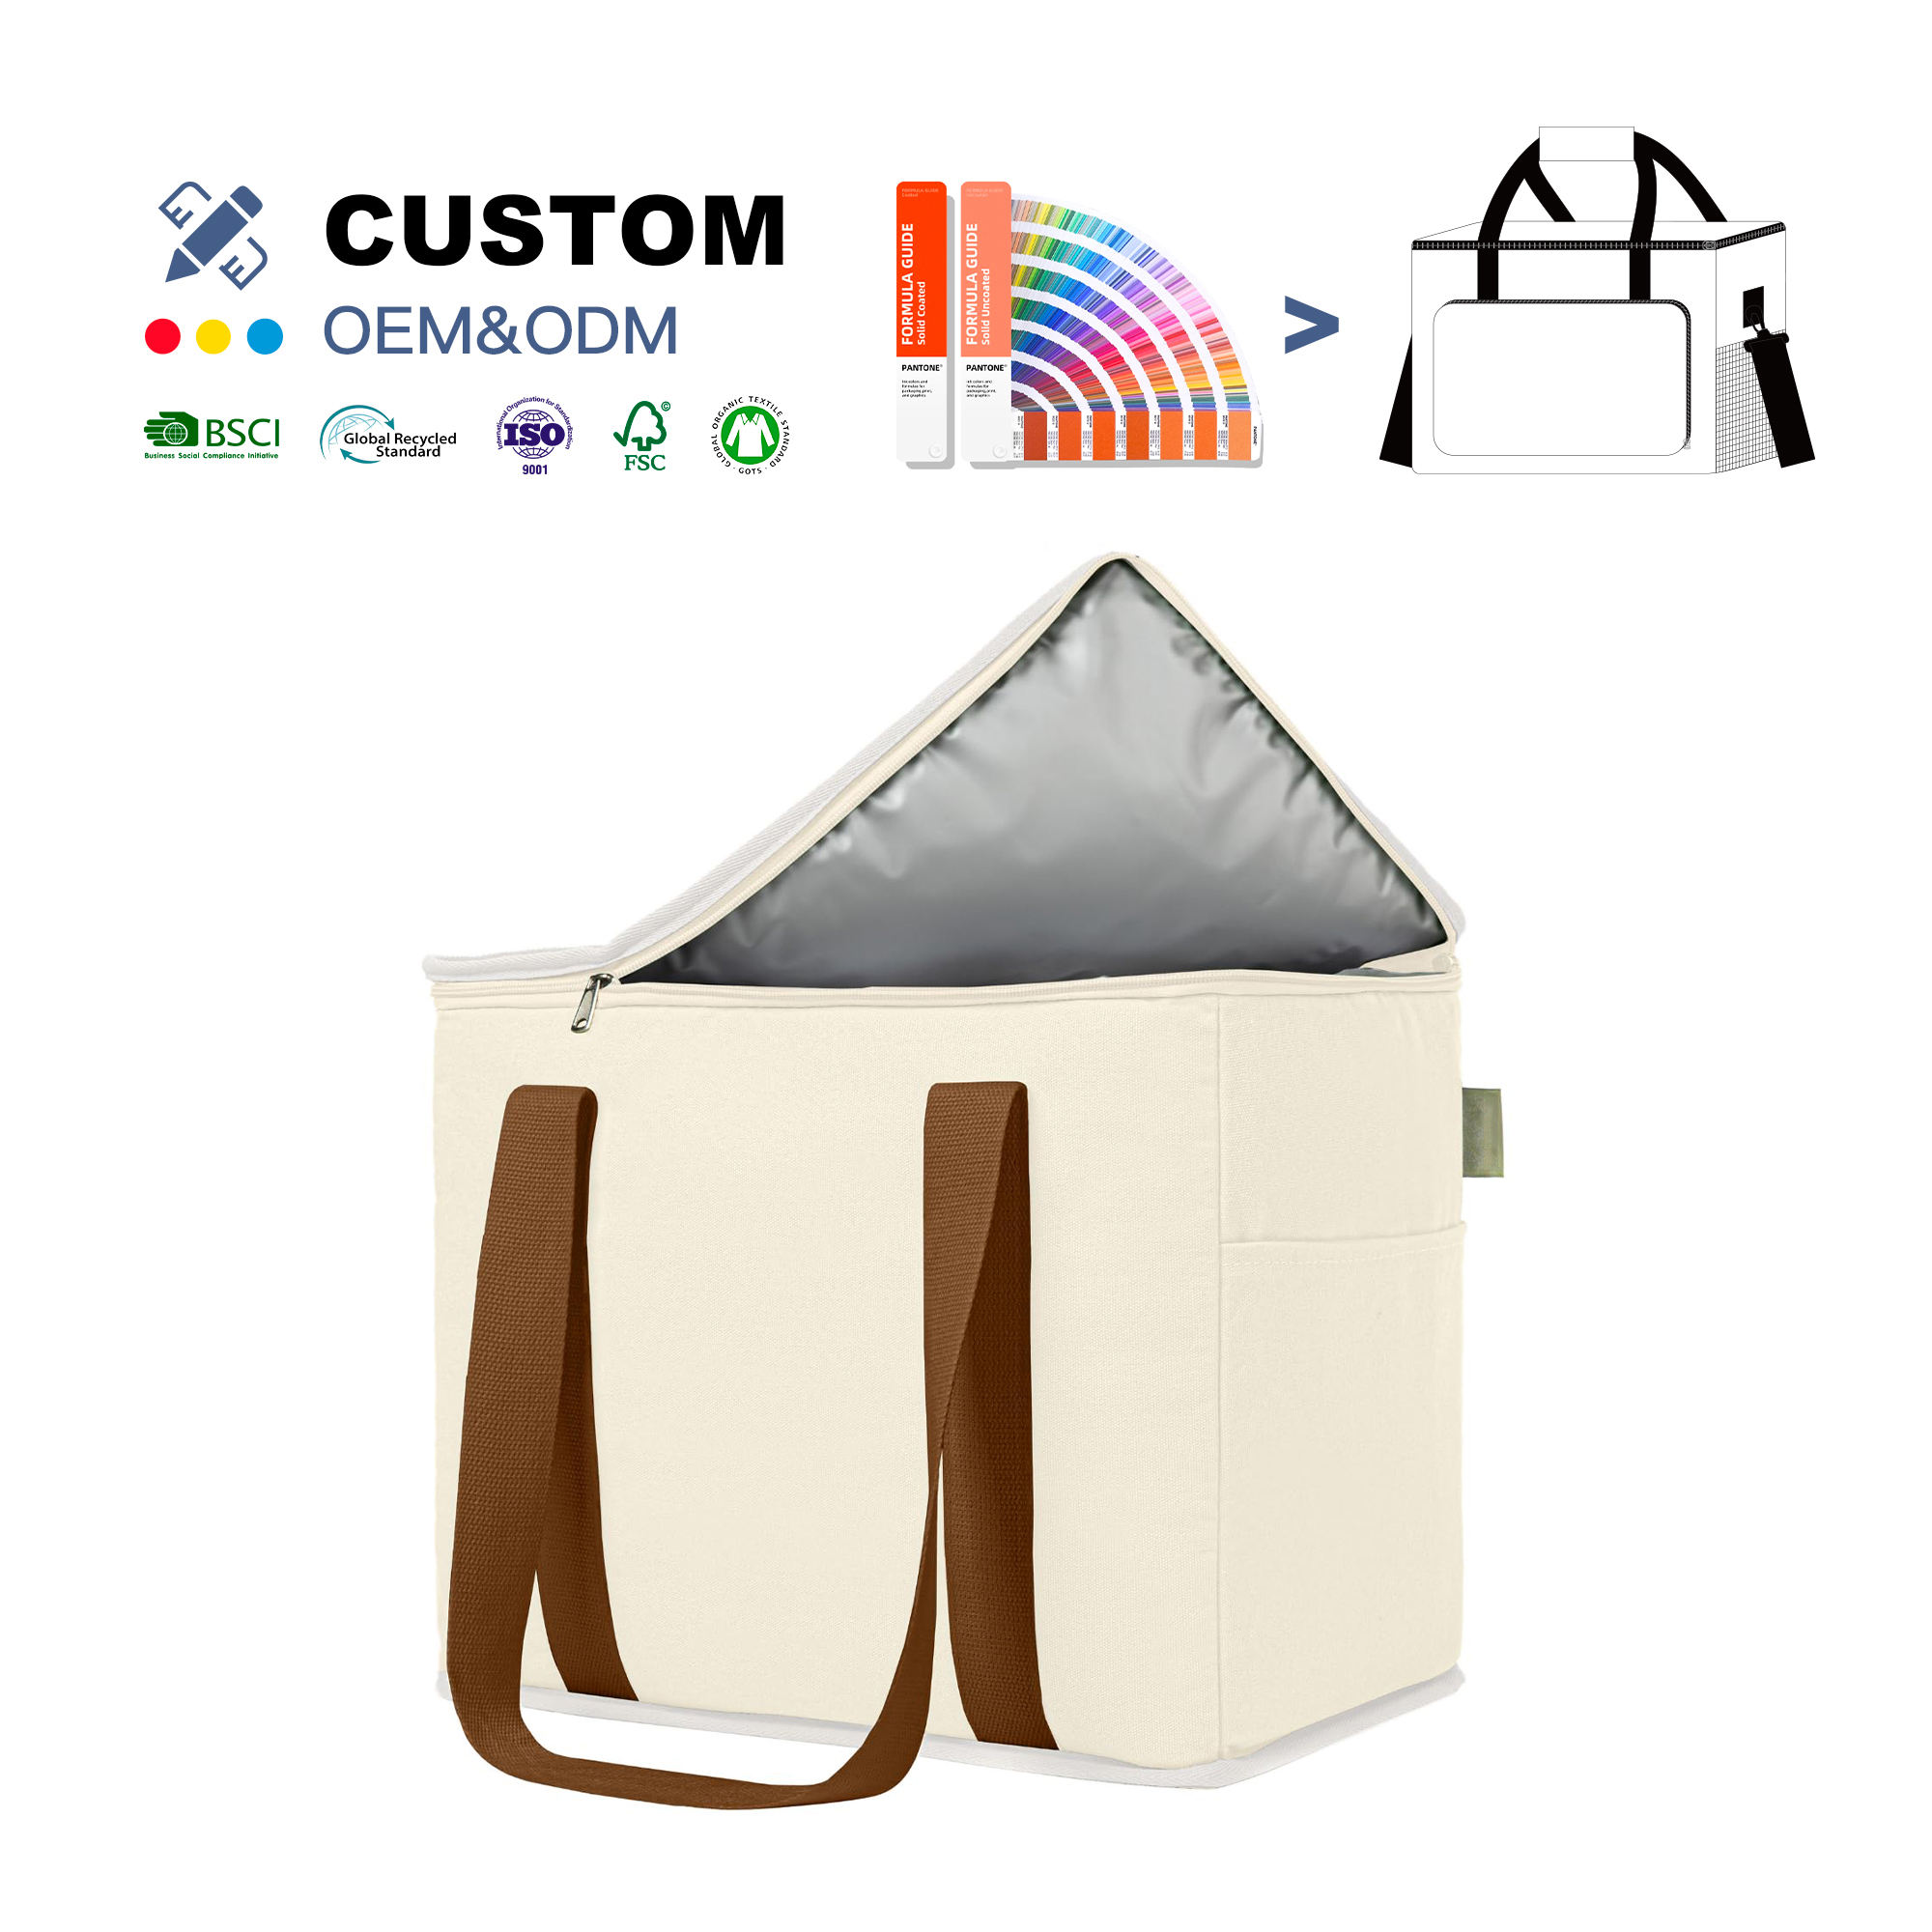 ODM OEM Kuoshi Reusable X Large Insulated Cooler Bag Natural Canvas 12oz Cotton Canvas Insulation Cooler Bags